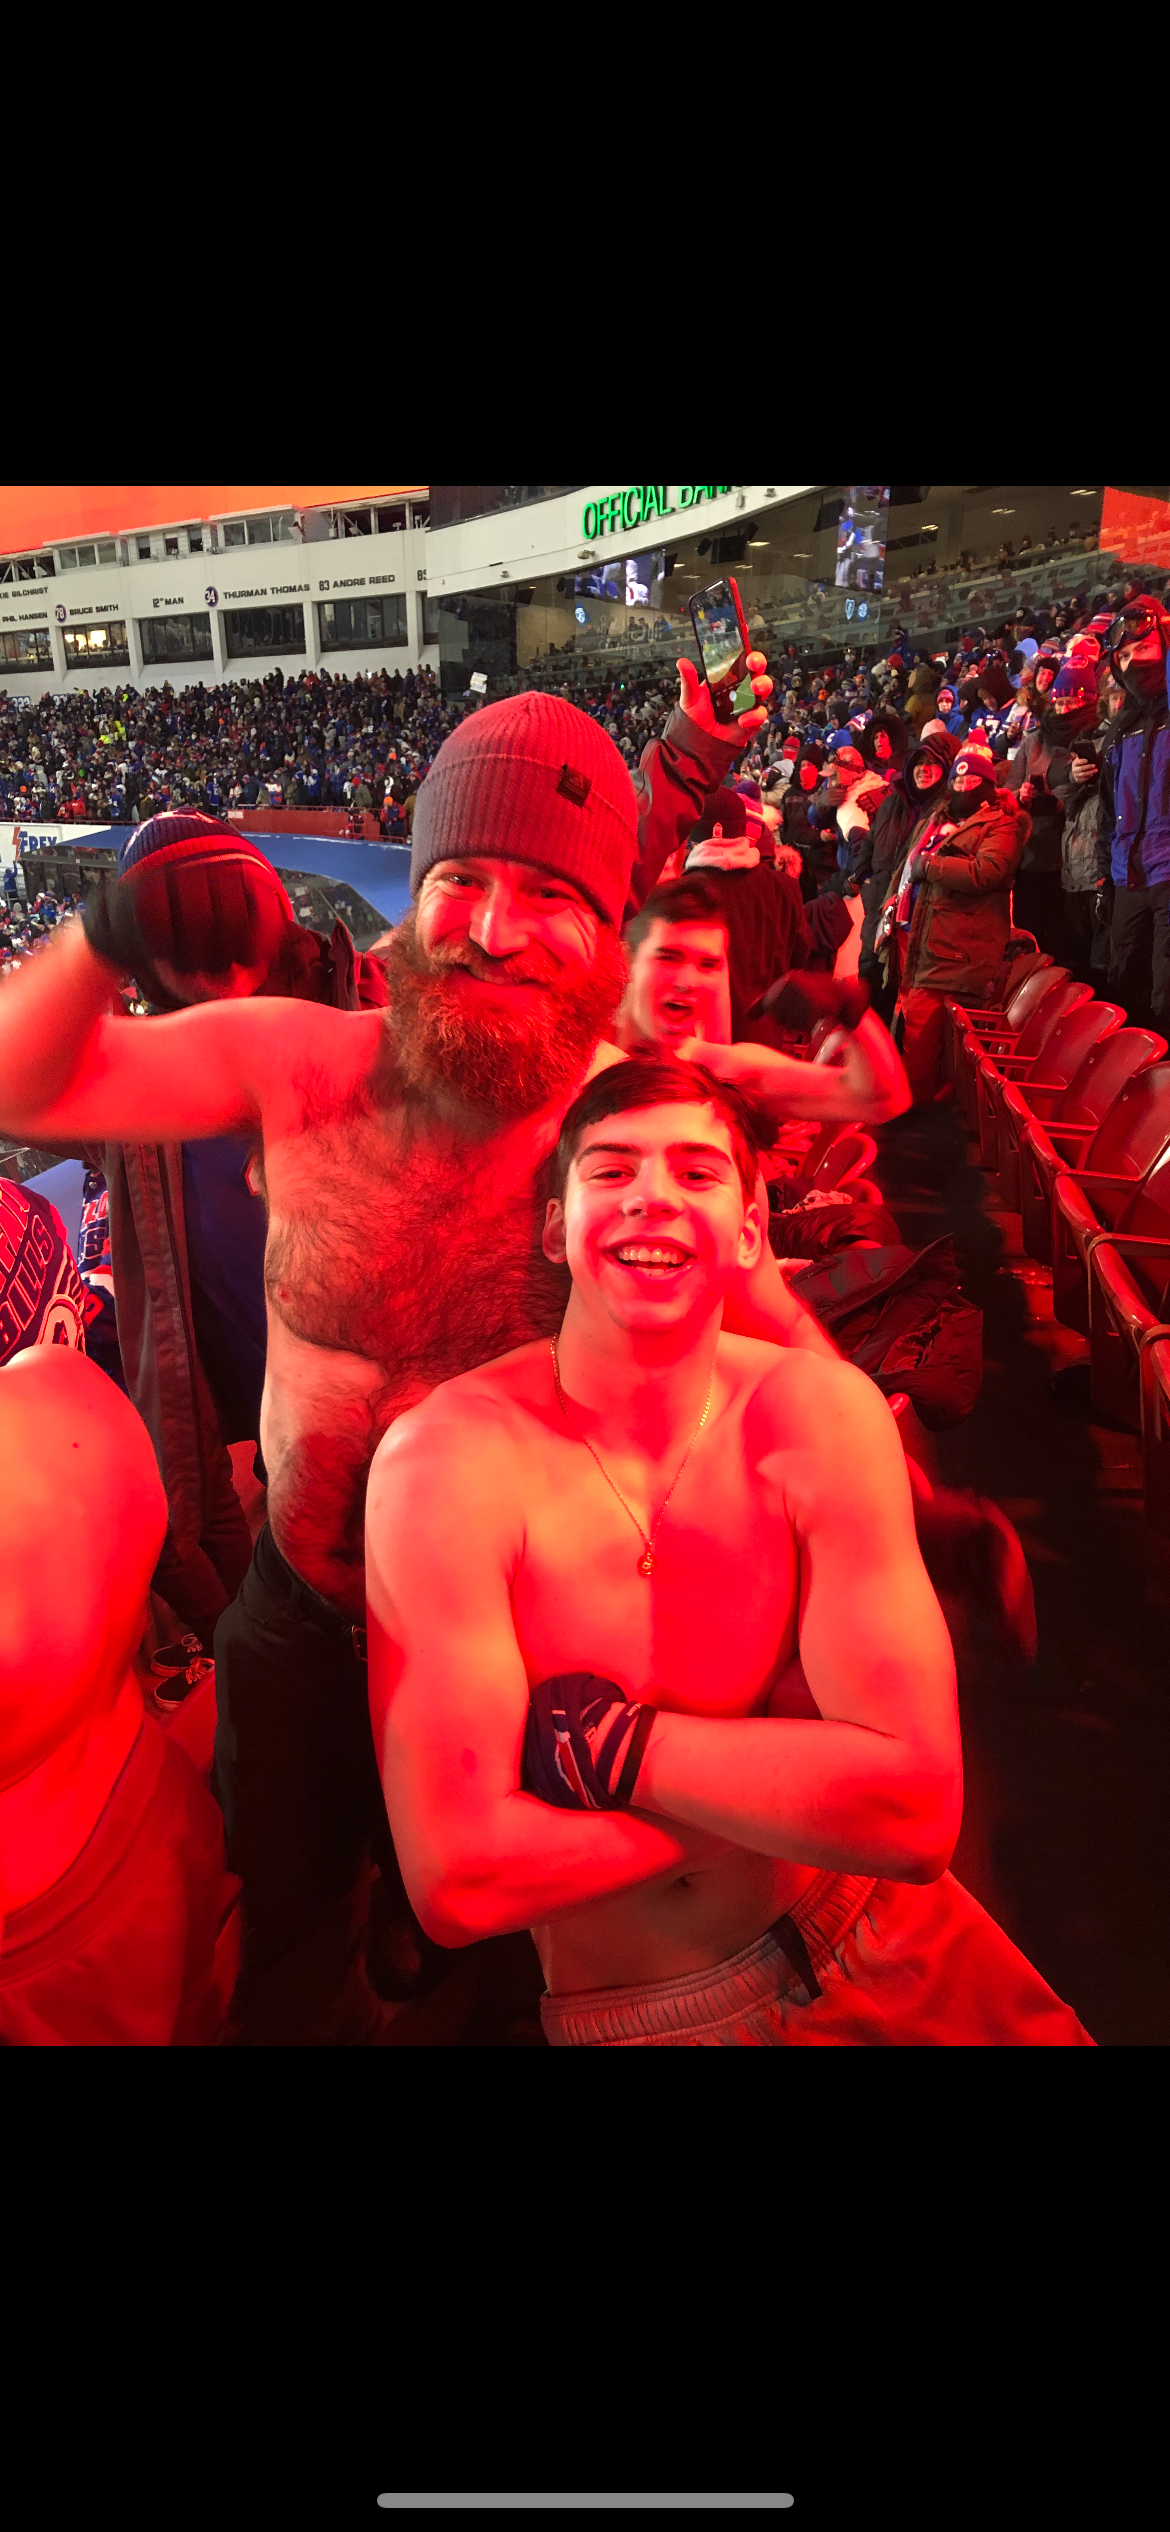 'Heat of the moment': Fan describes viral photo with shirtless Ryan Fitzpatrick at frigid Bills game